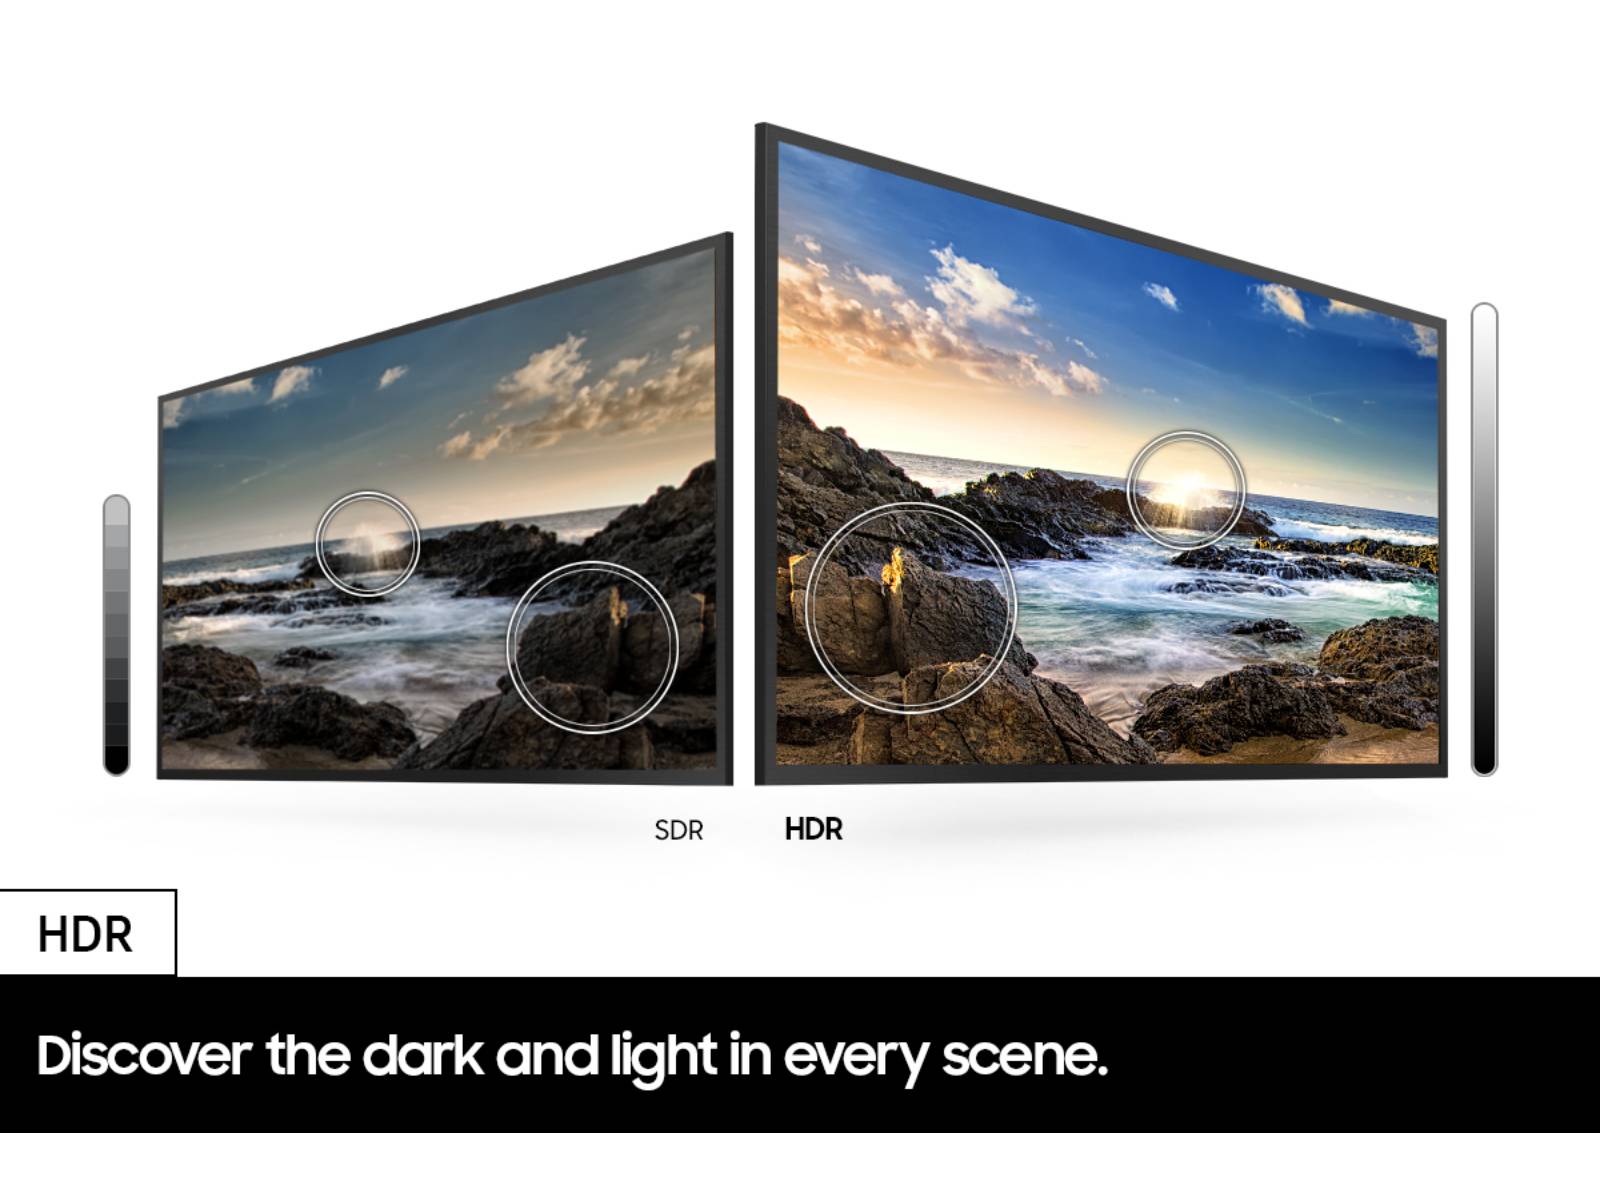 SAMSUNG 43 Class 4K UHD 2160p LED Smart TV with HDR UN43NU6900